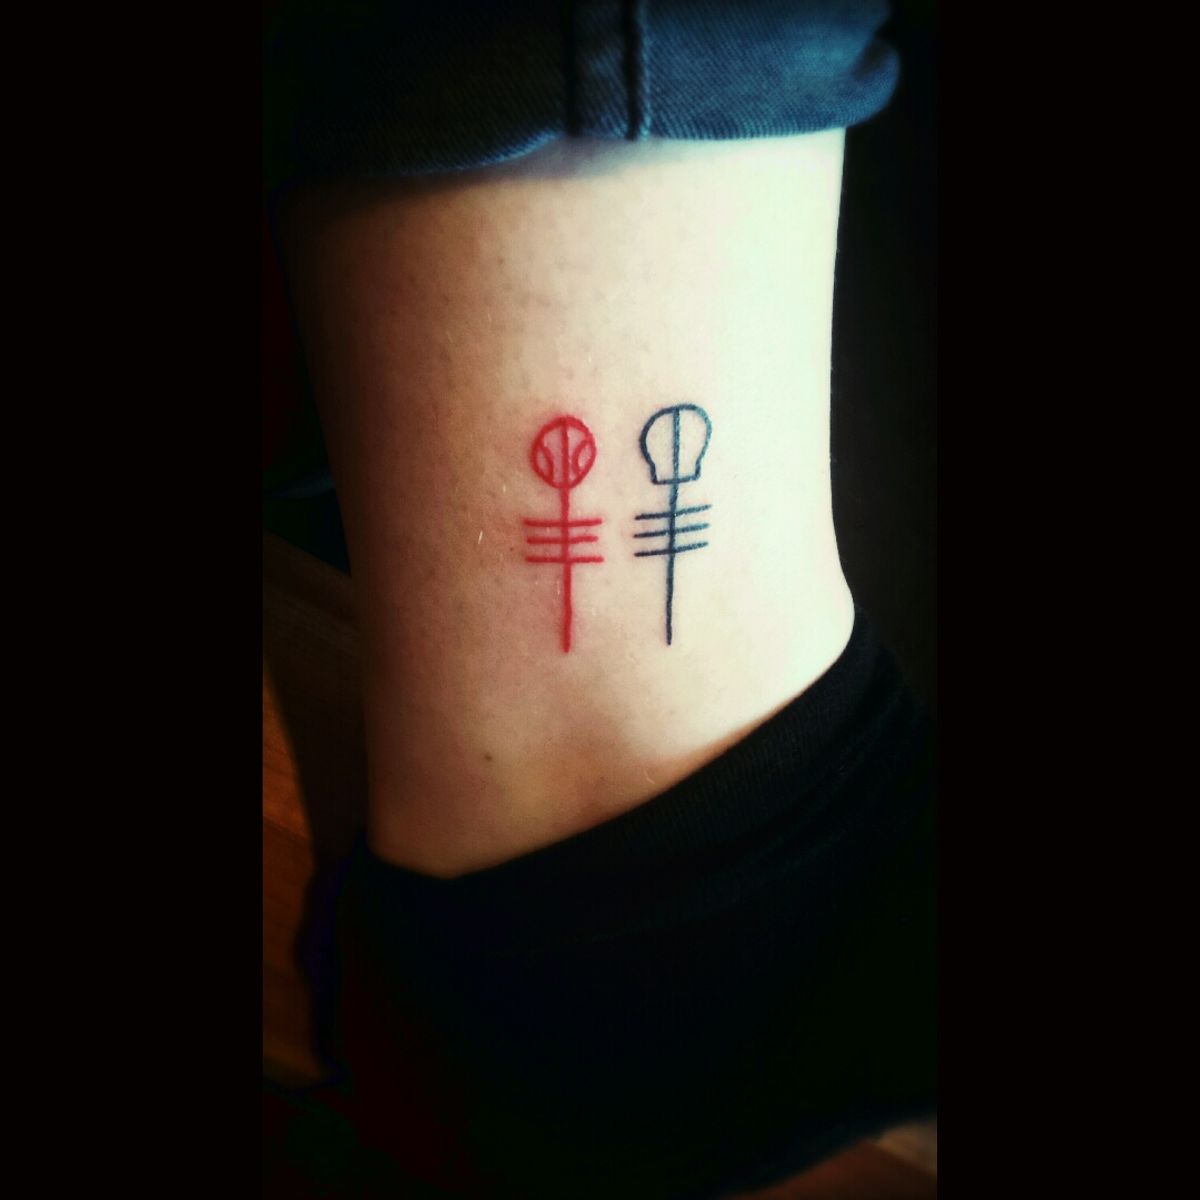 Tattoo uploaded by Robyn Morgan • In love with this one! A bit sore now  ahaha #twentyonepilots #band #music #simple #logo #bandlogo #inlove  #linework #smallbutmighty #meaningful #favourite • Tattoodo